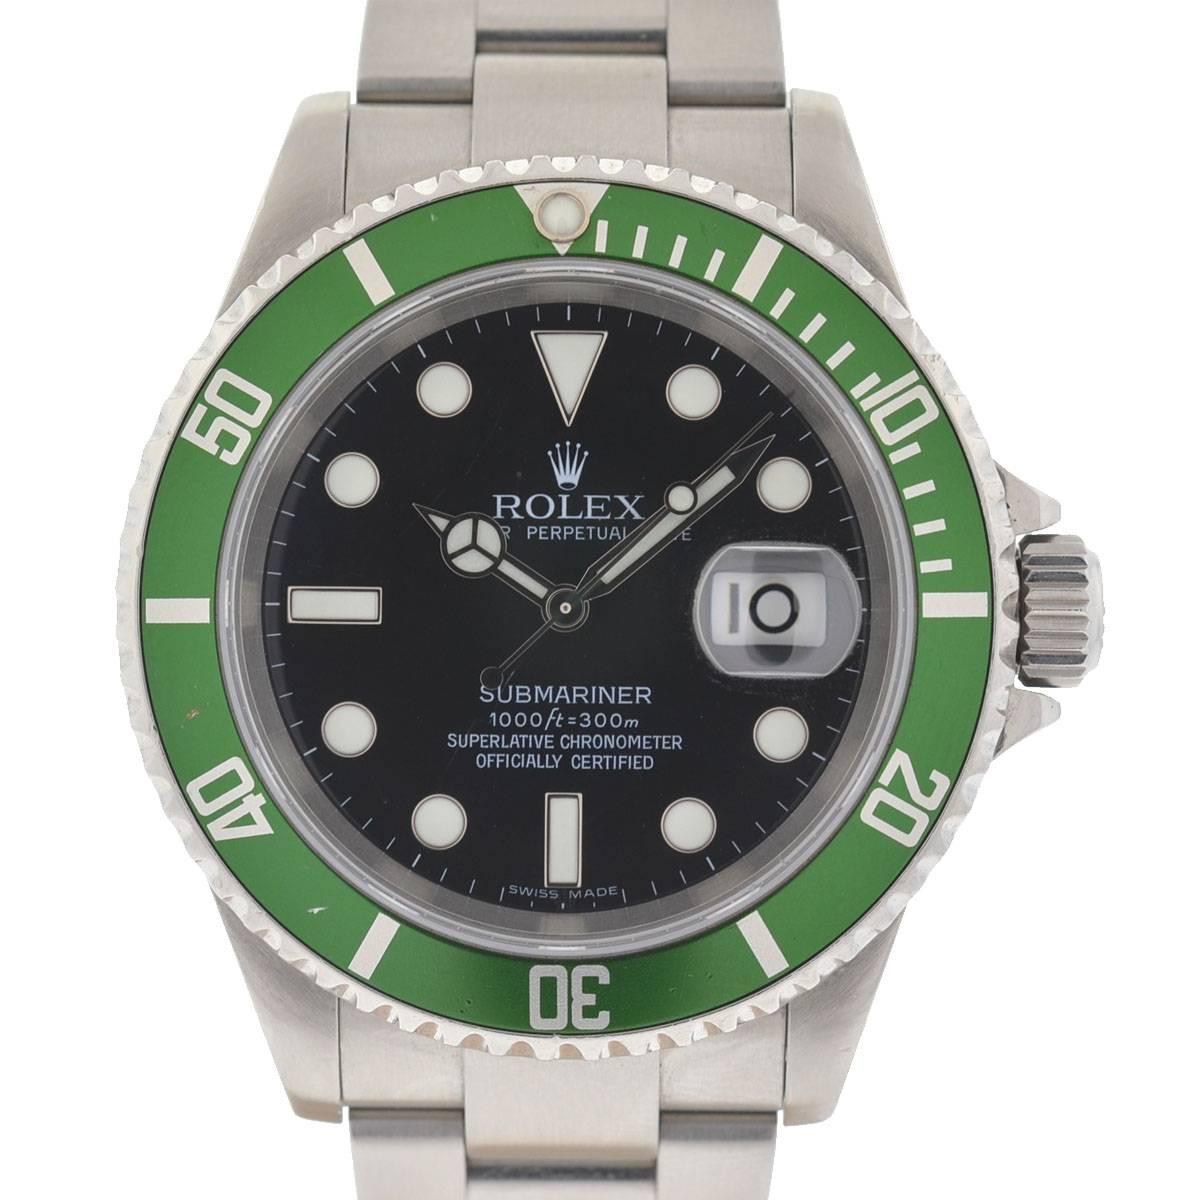 Company - Rolex
Model - 50th Anniversary Green Bezel Submariner
Case Metal - Stainless Steel
Case Measurement - 40mm
Bracelet - Stainless Steel - Fits up to a 7